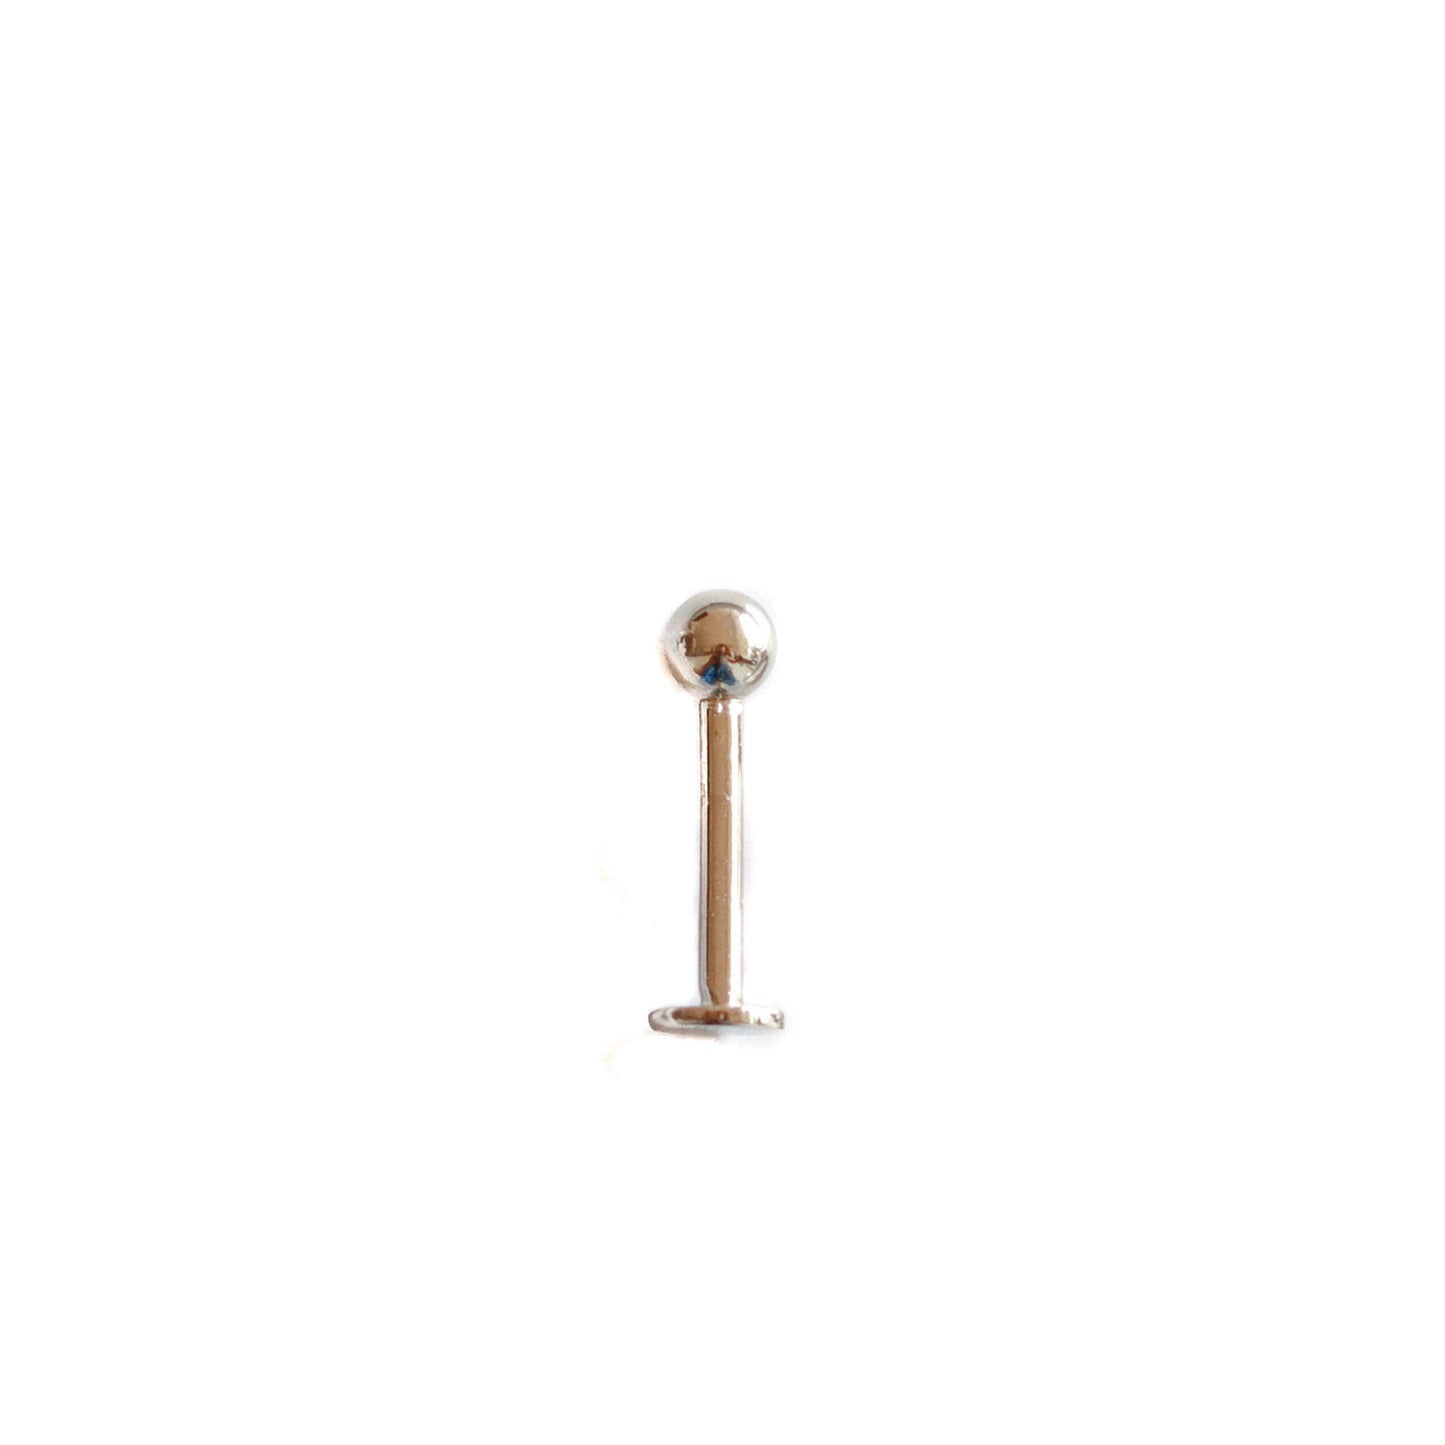 Solid 925 Silver |  Little Sphere Threaded Flat Back Earring | Tragus | Helix | Conch | Cartilage | Earlobe - Sturdy South